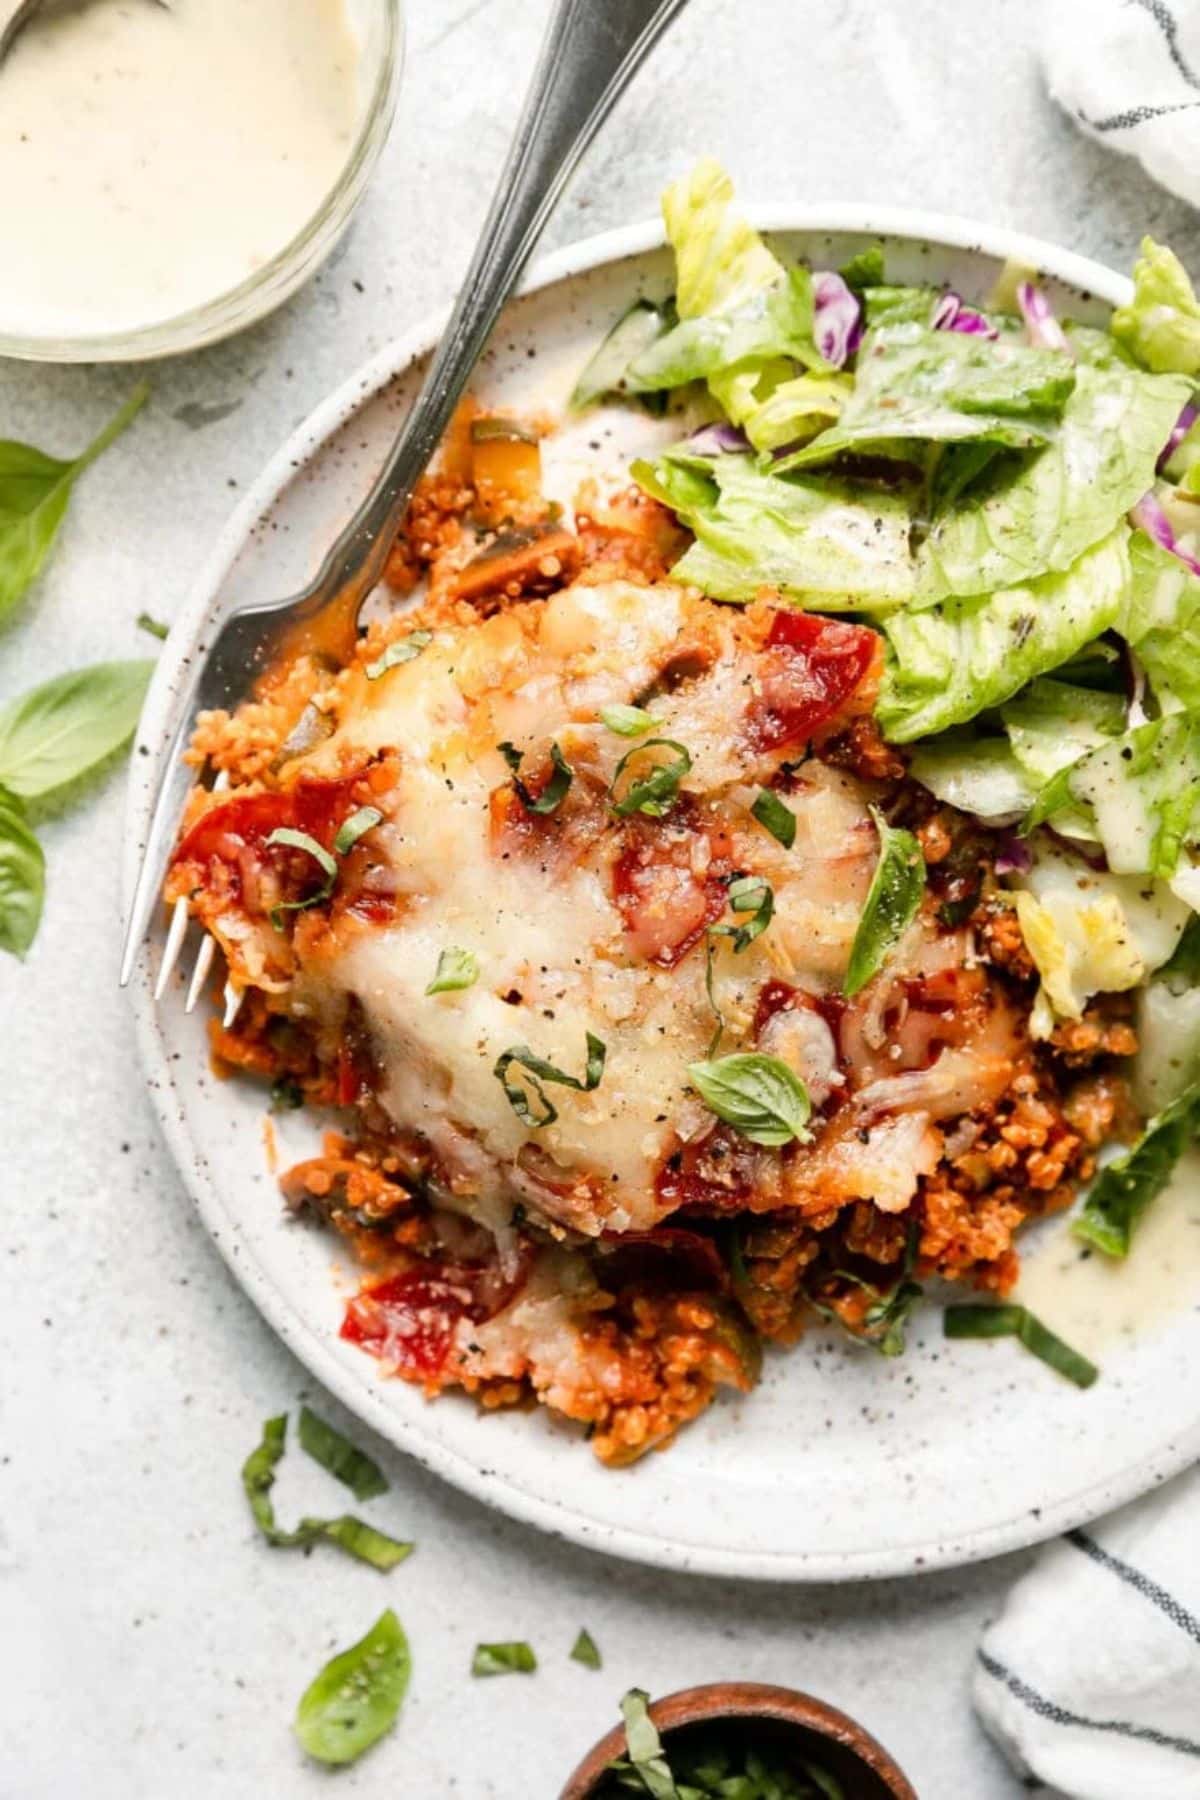 A piece of quinoa pizza on a plate with salad and a fork.